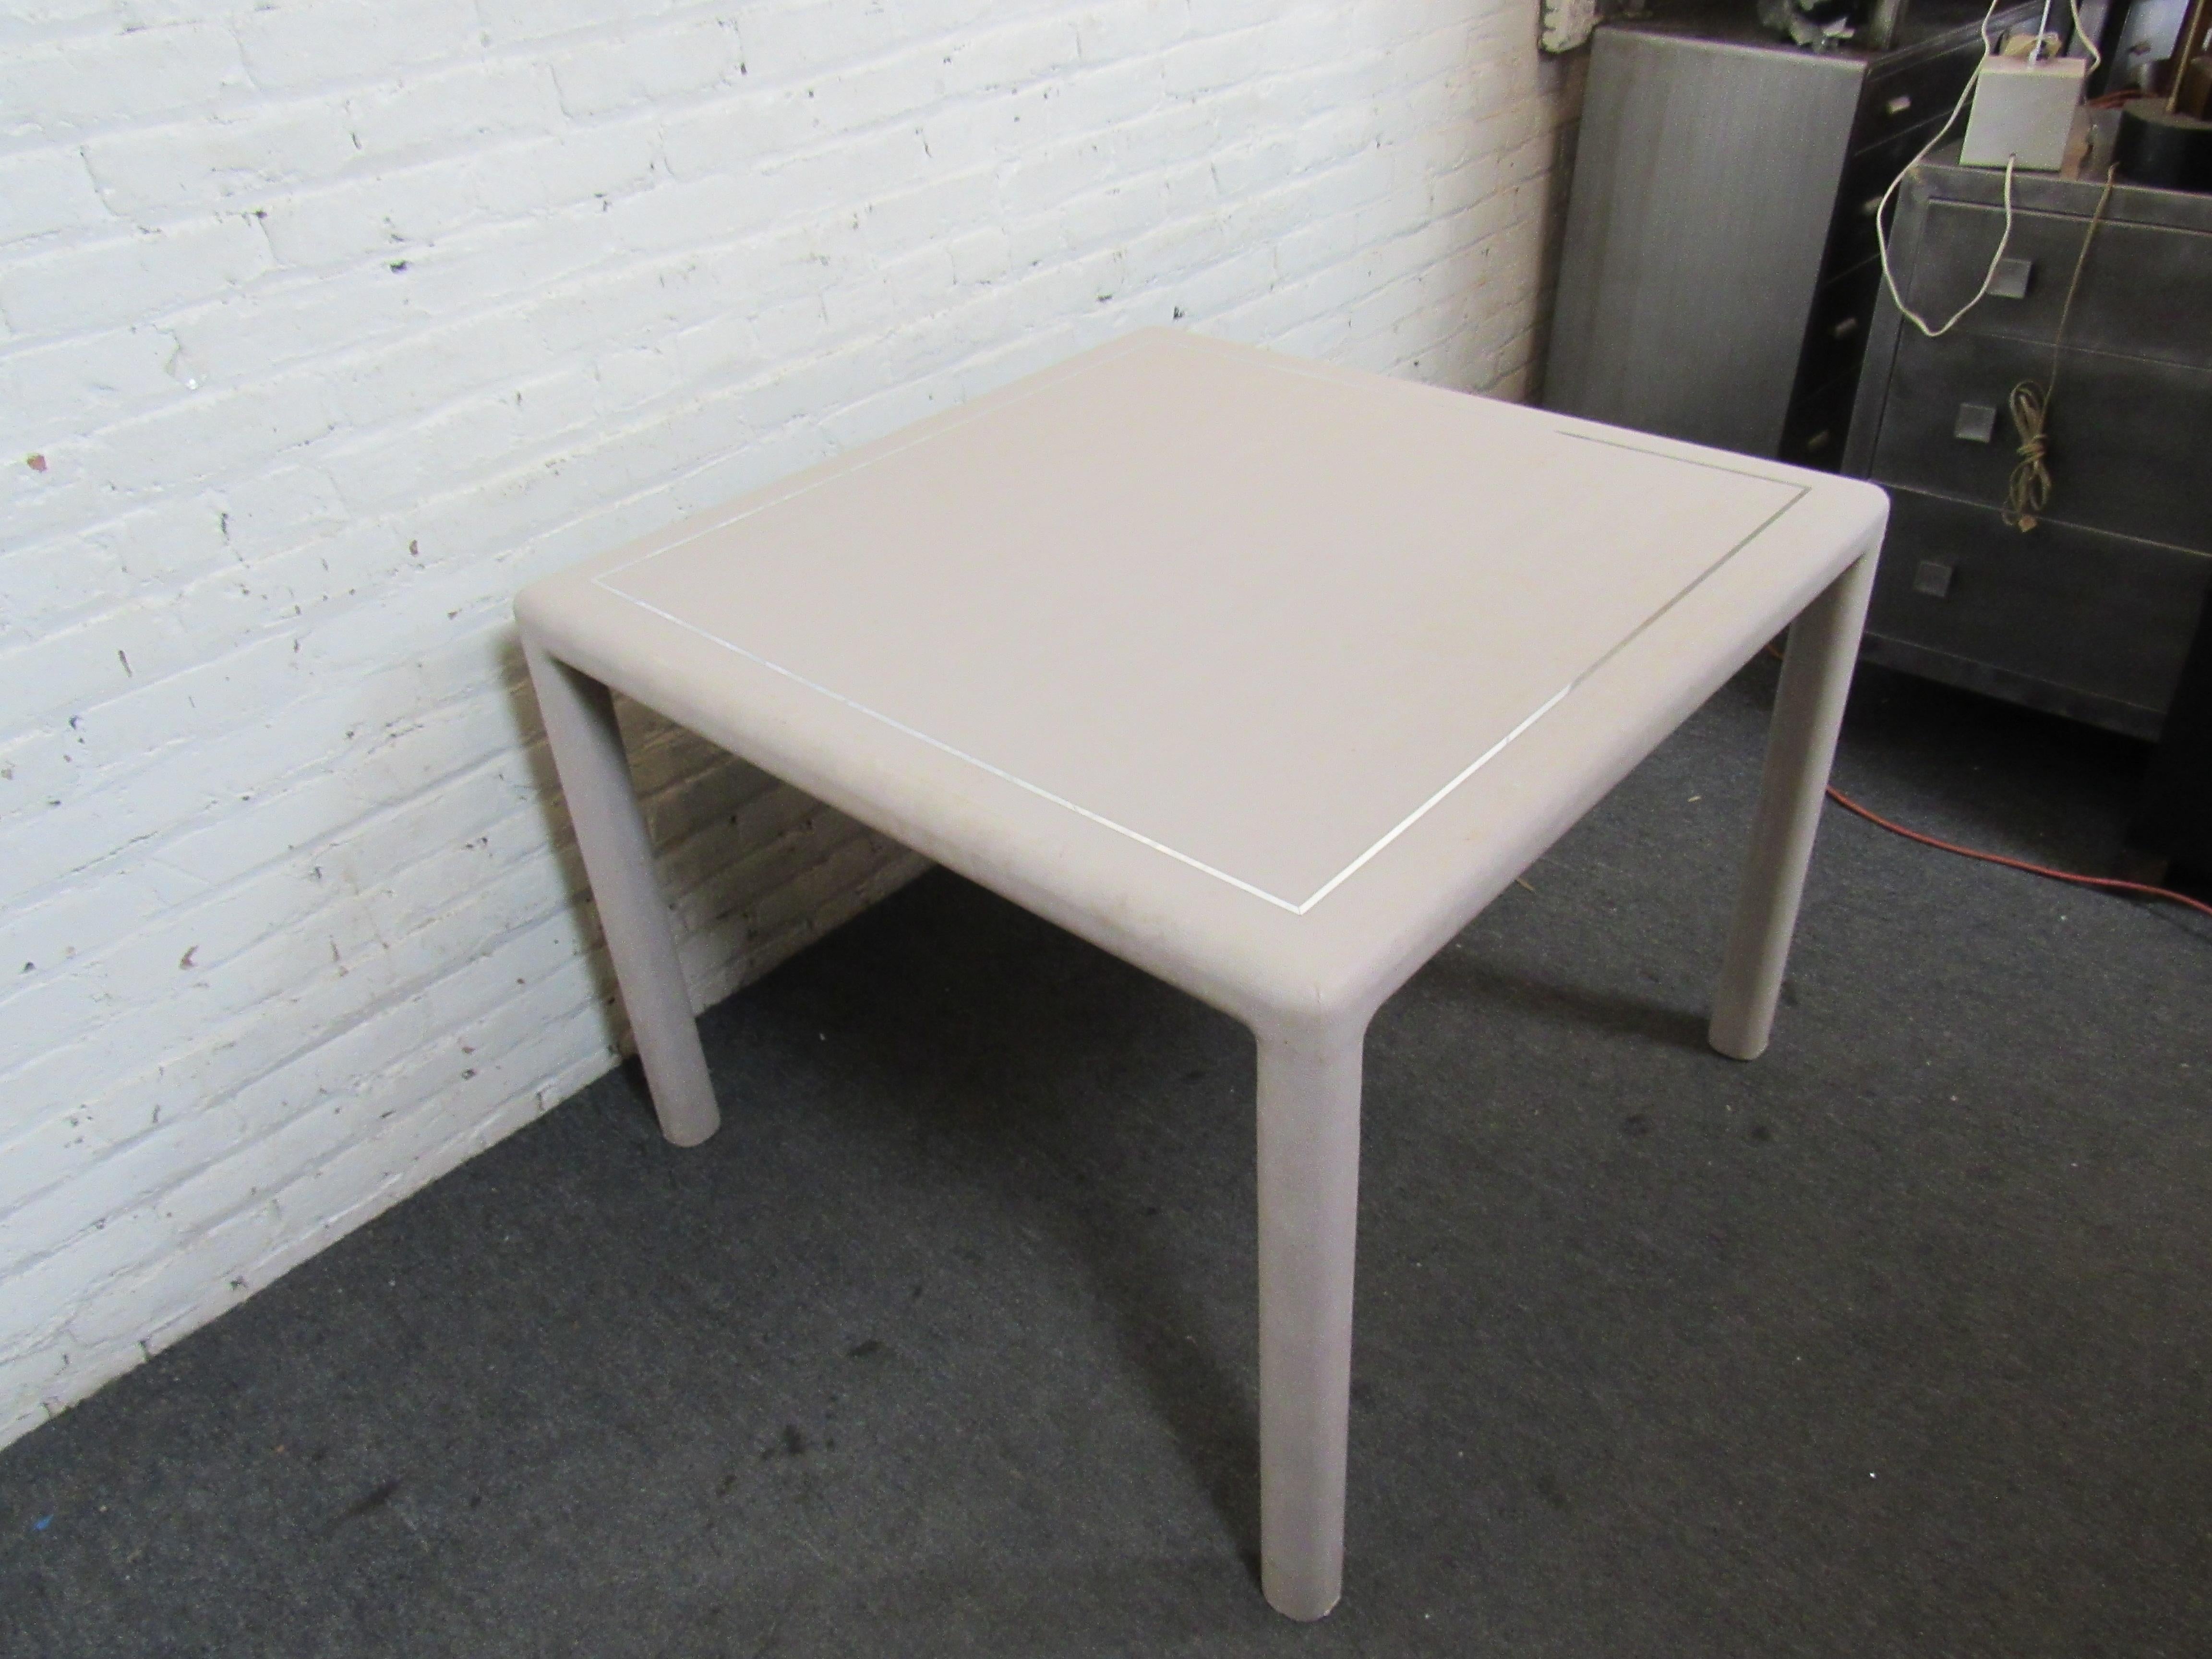 Wild pale-pink snakeskin table with slight chrome trim. Perfect for a small dining table.
(Please confirm item location - NY or NJ - with dealer).
 